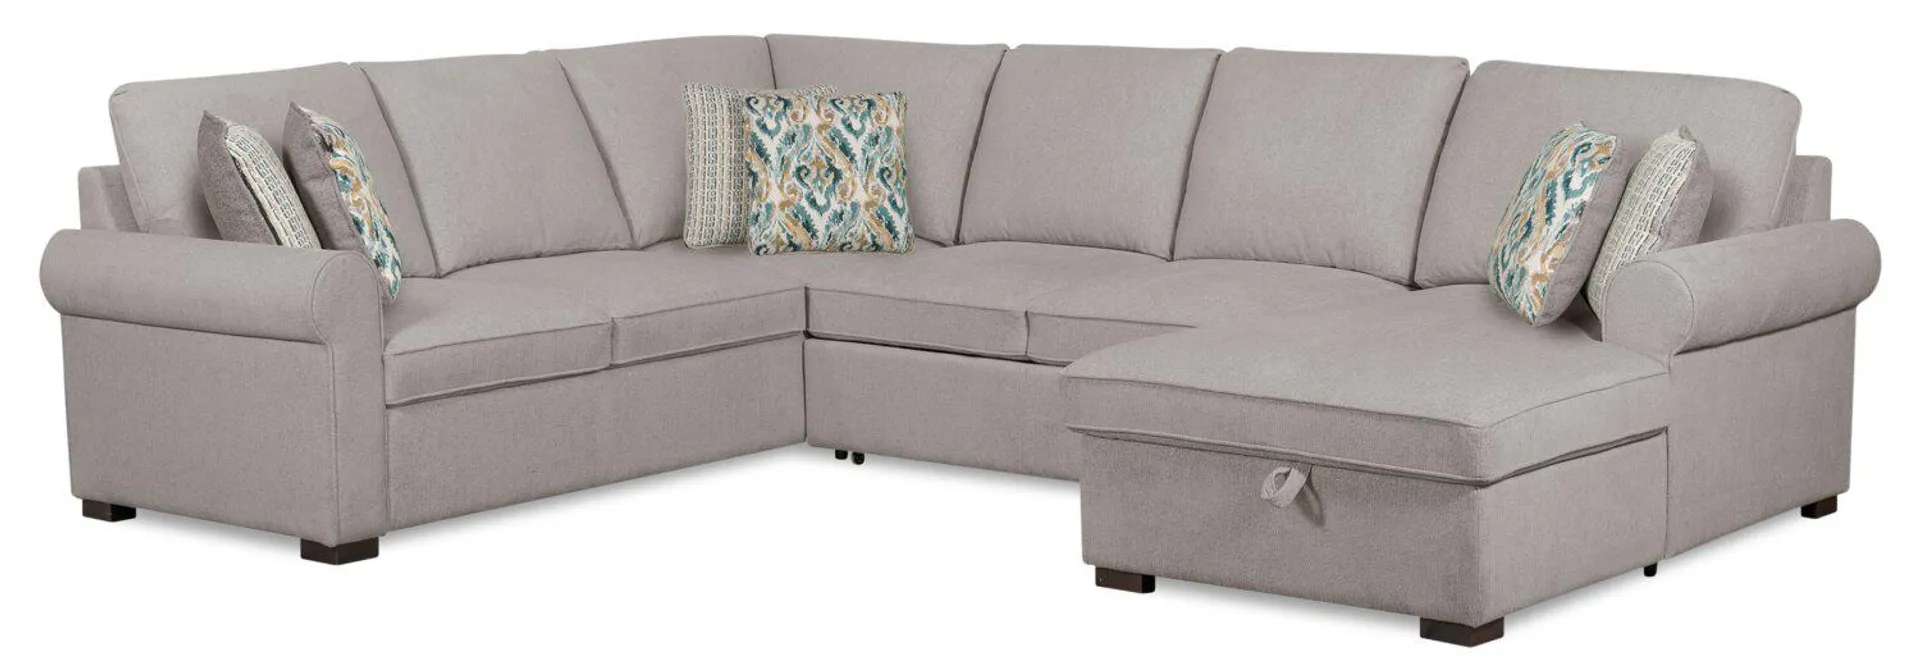 Haven 3-Piece Chenille Right-Facing Sleeper Sectional - Grey